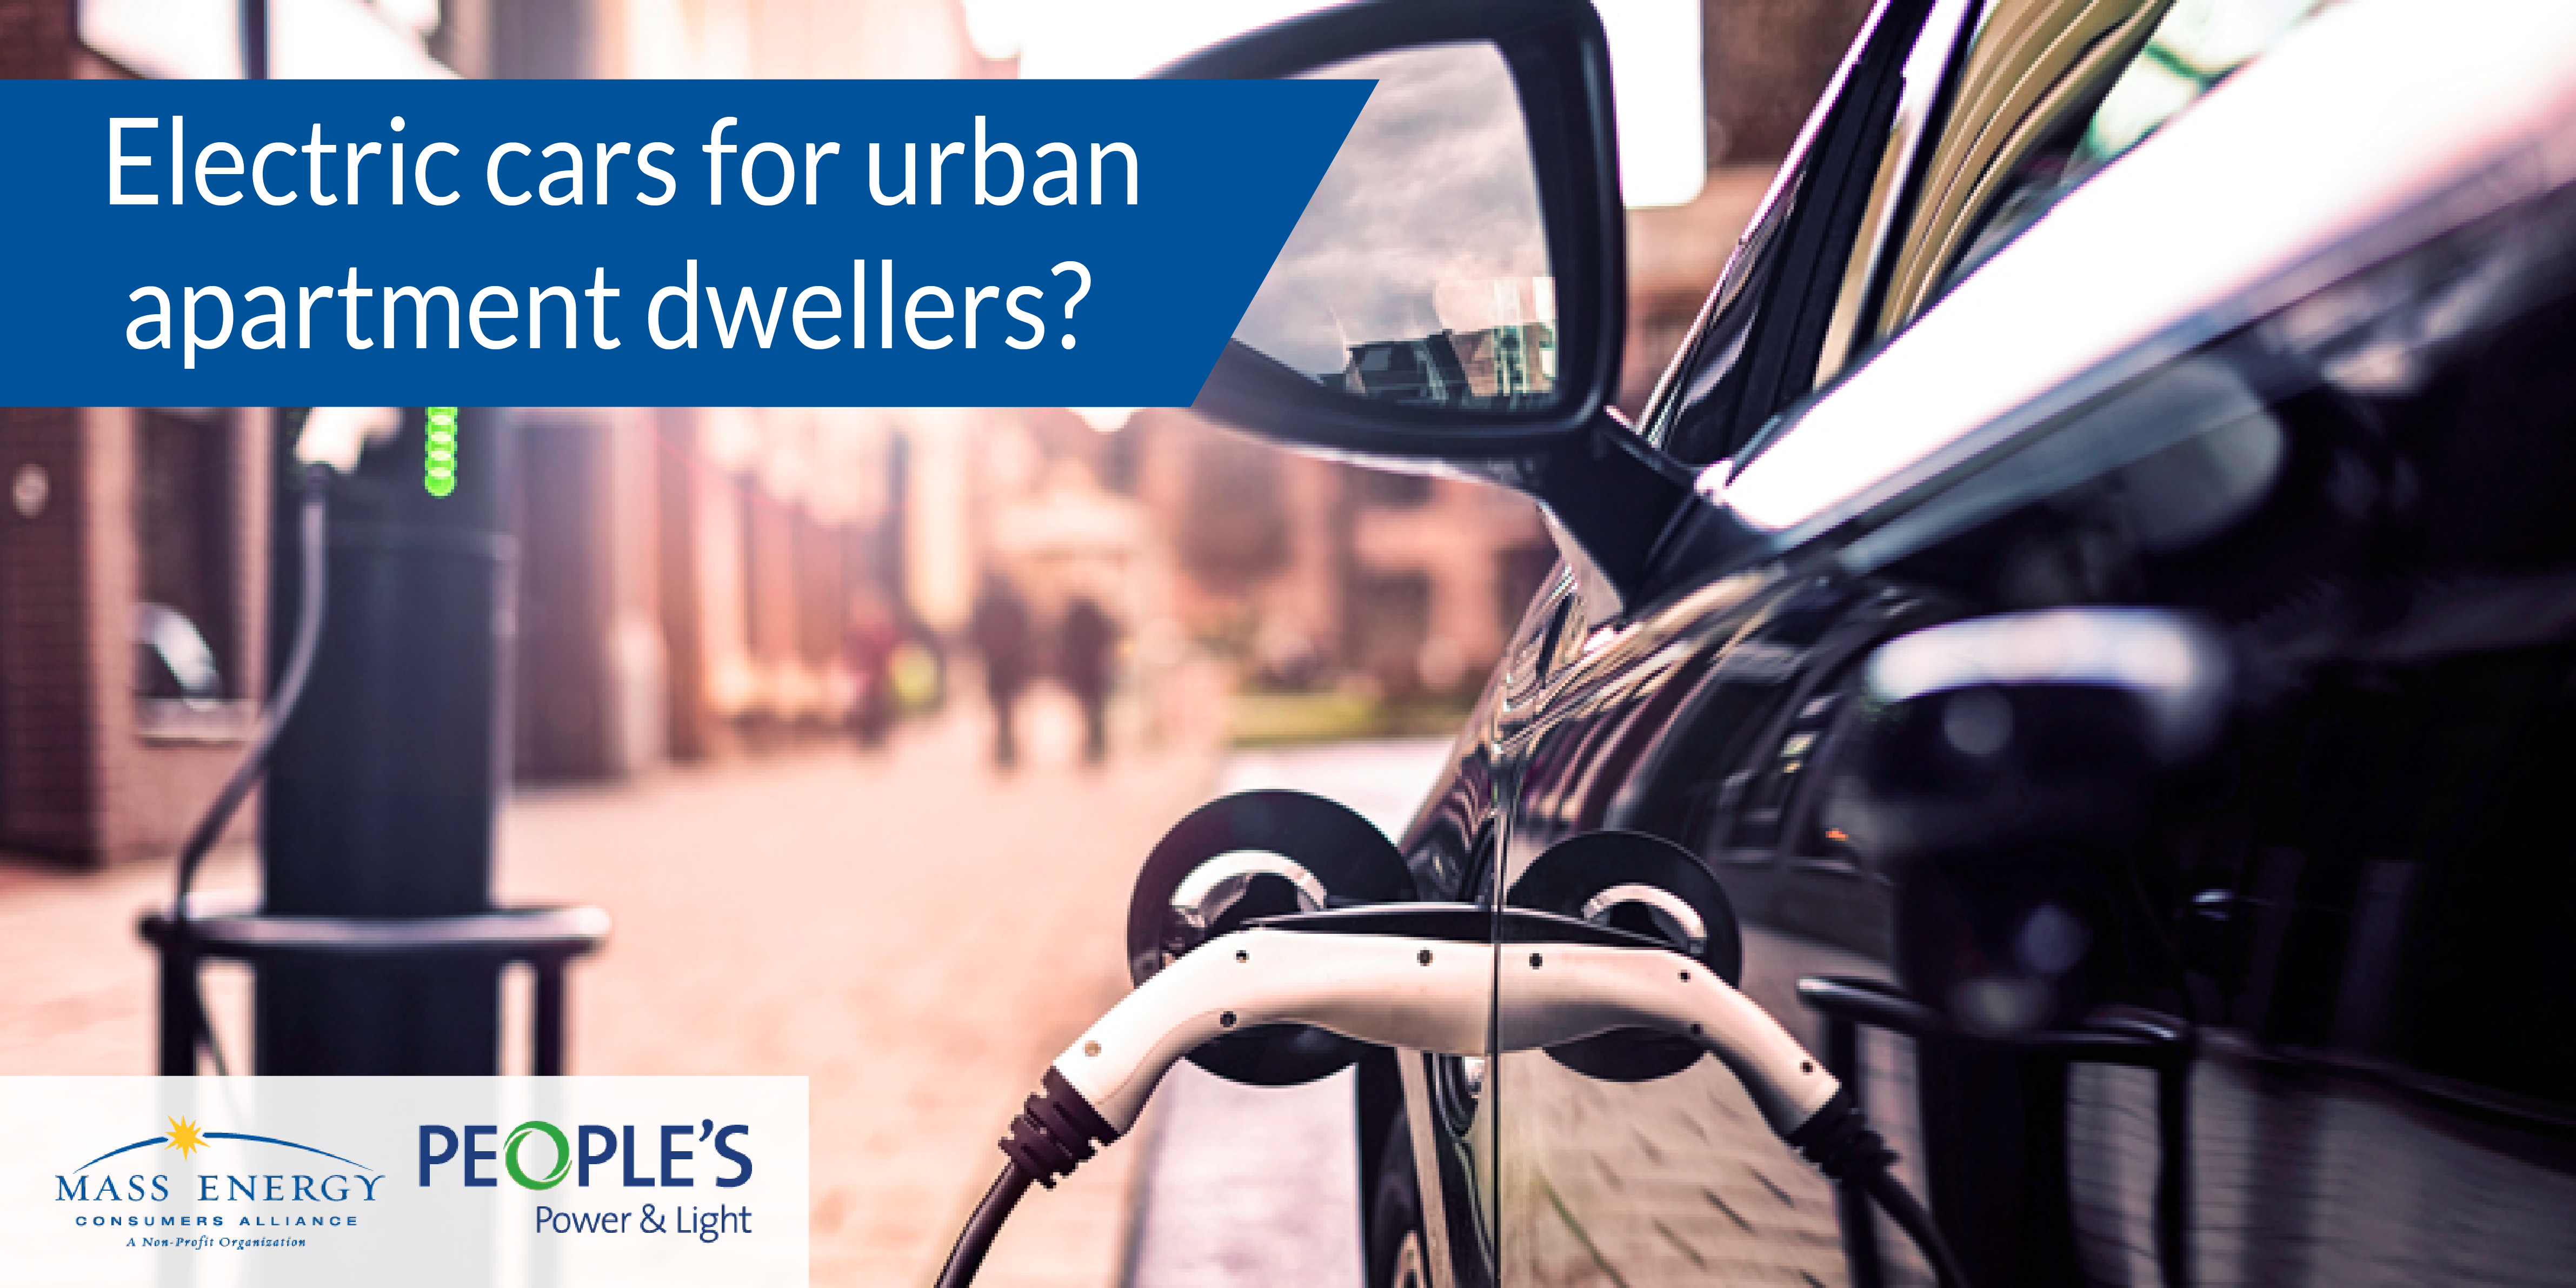 Electric cars for urban apartment dwellers?